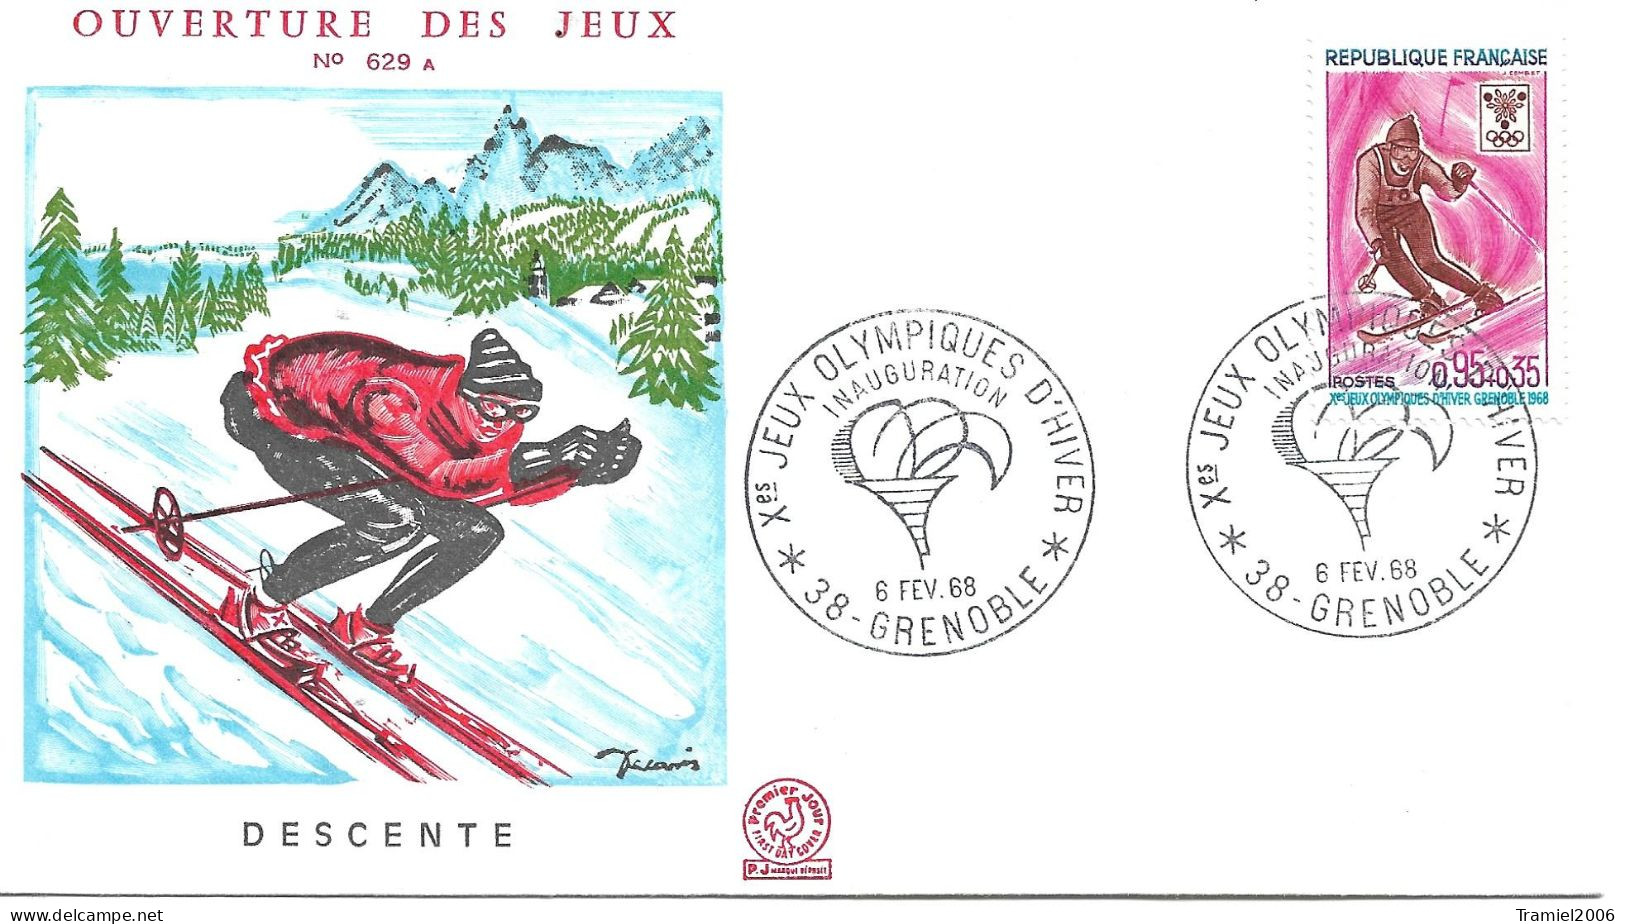 FRANCE 1968 - YT 1547 - Xe Jeux Olympiques D'Hiver Grenoble 1968 - INAUGURATION - 06.02.1968 - 1960-1969